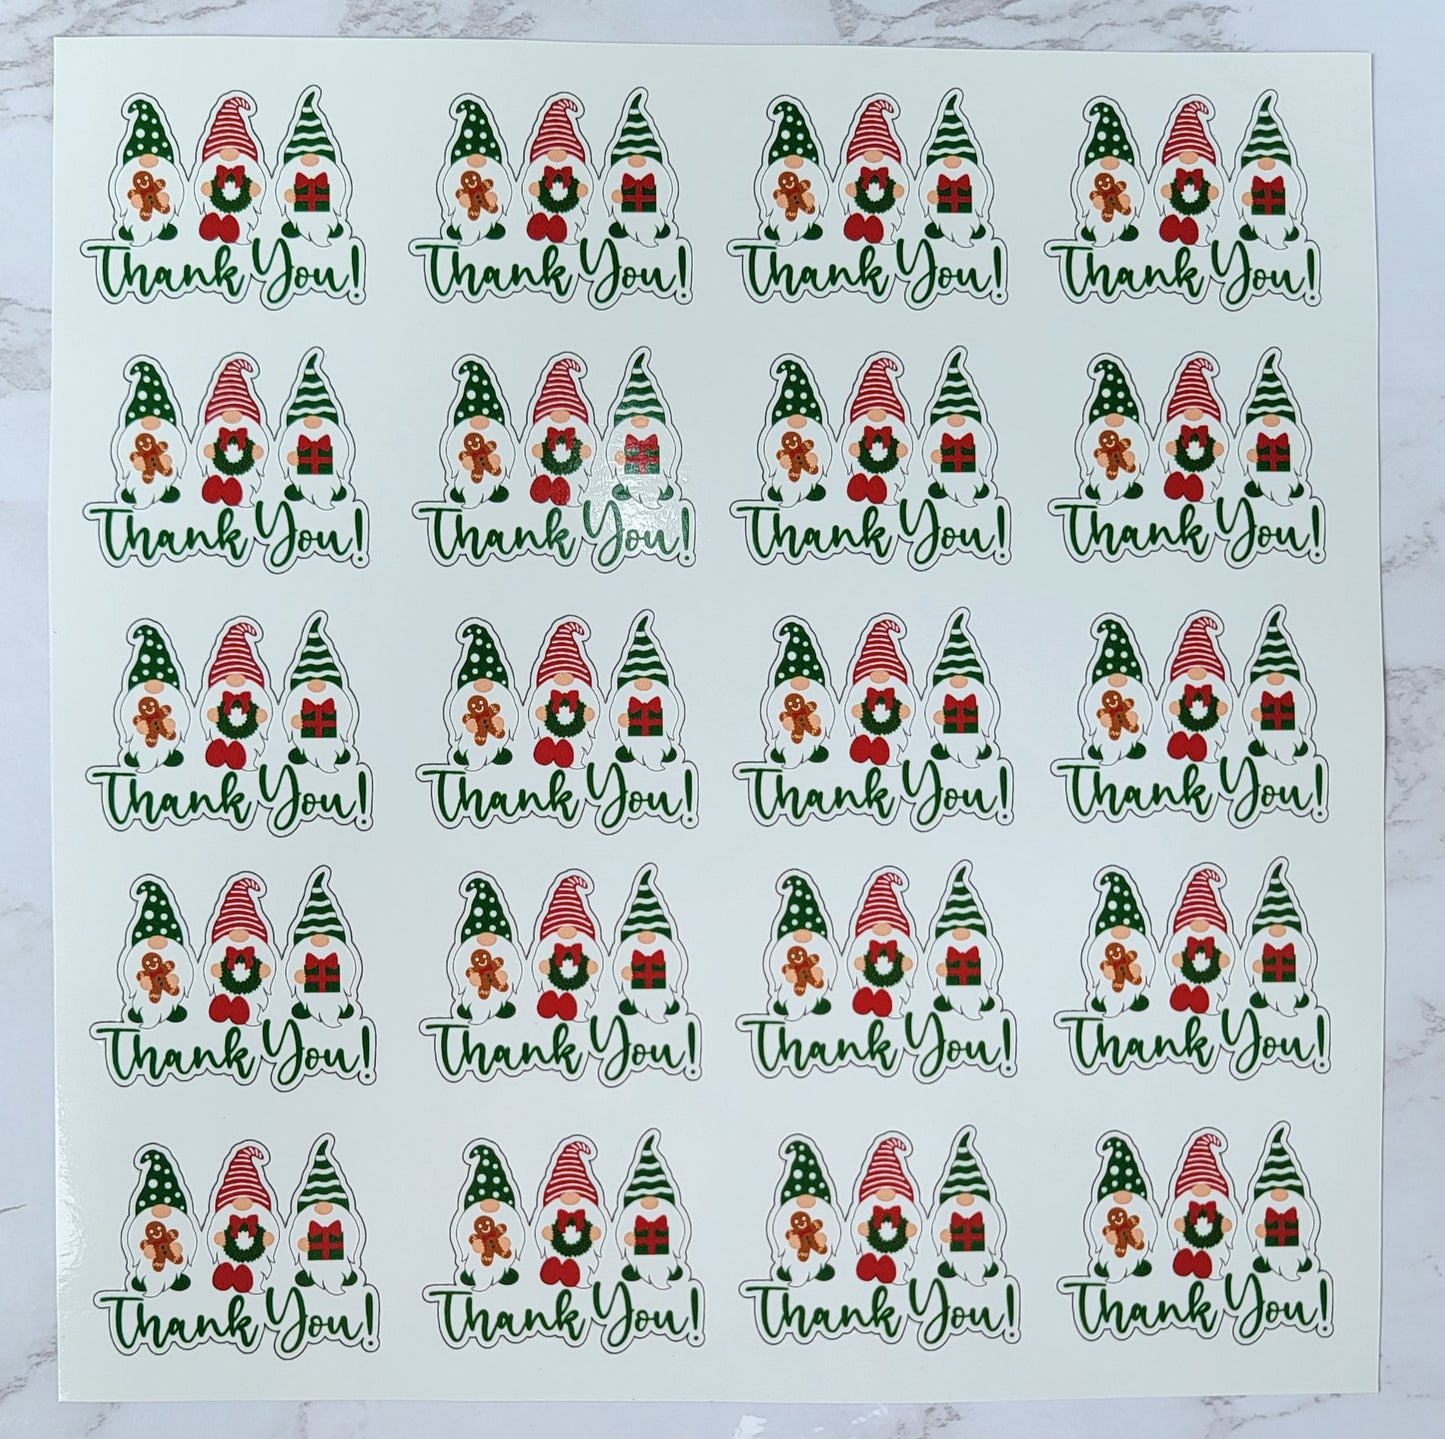 Christmas Theme - Garden Gnome - Cartoon - "Thank You" - Assorted Colors w/ White Background - Waterproof Sticker Sheet